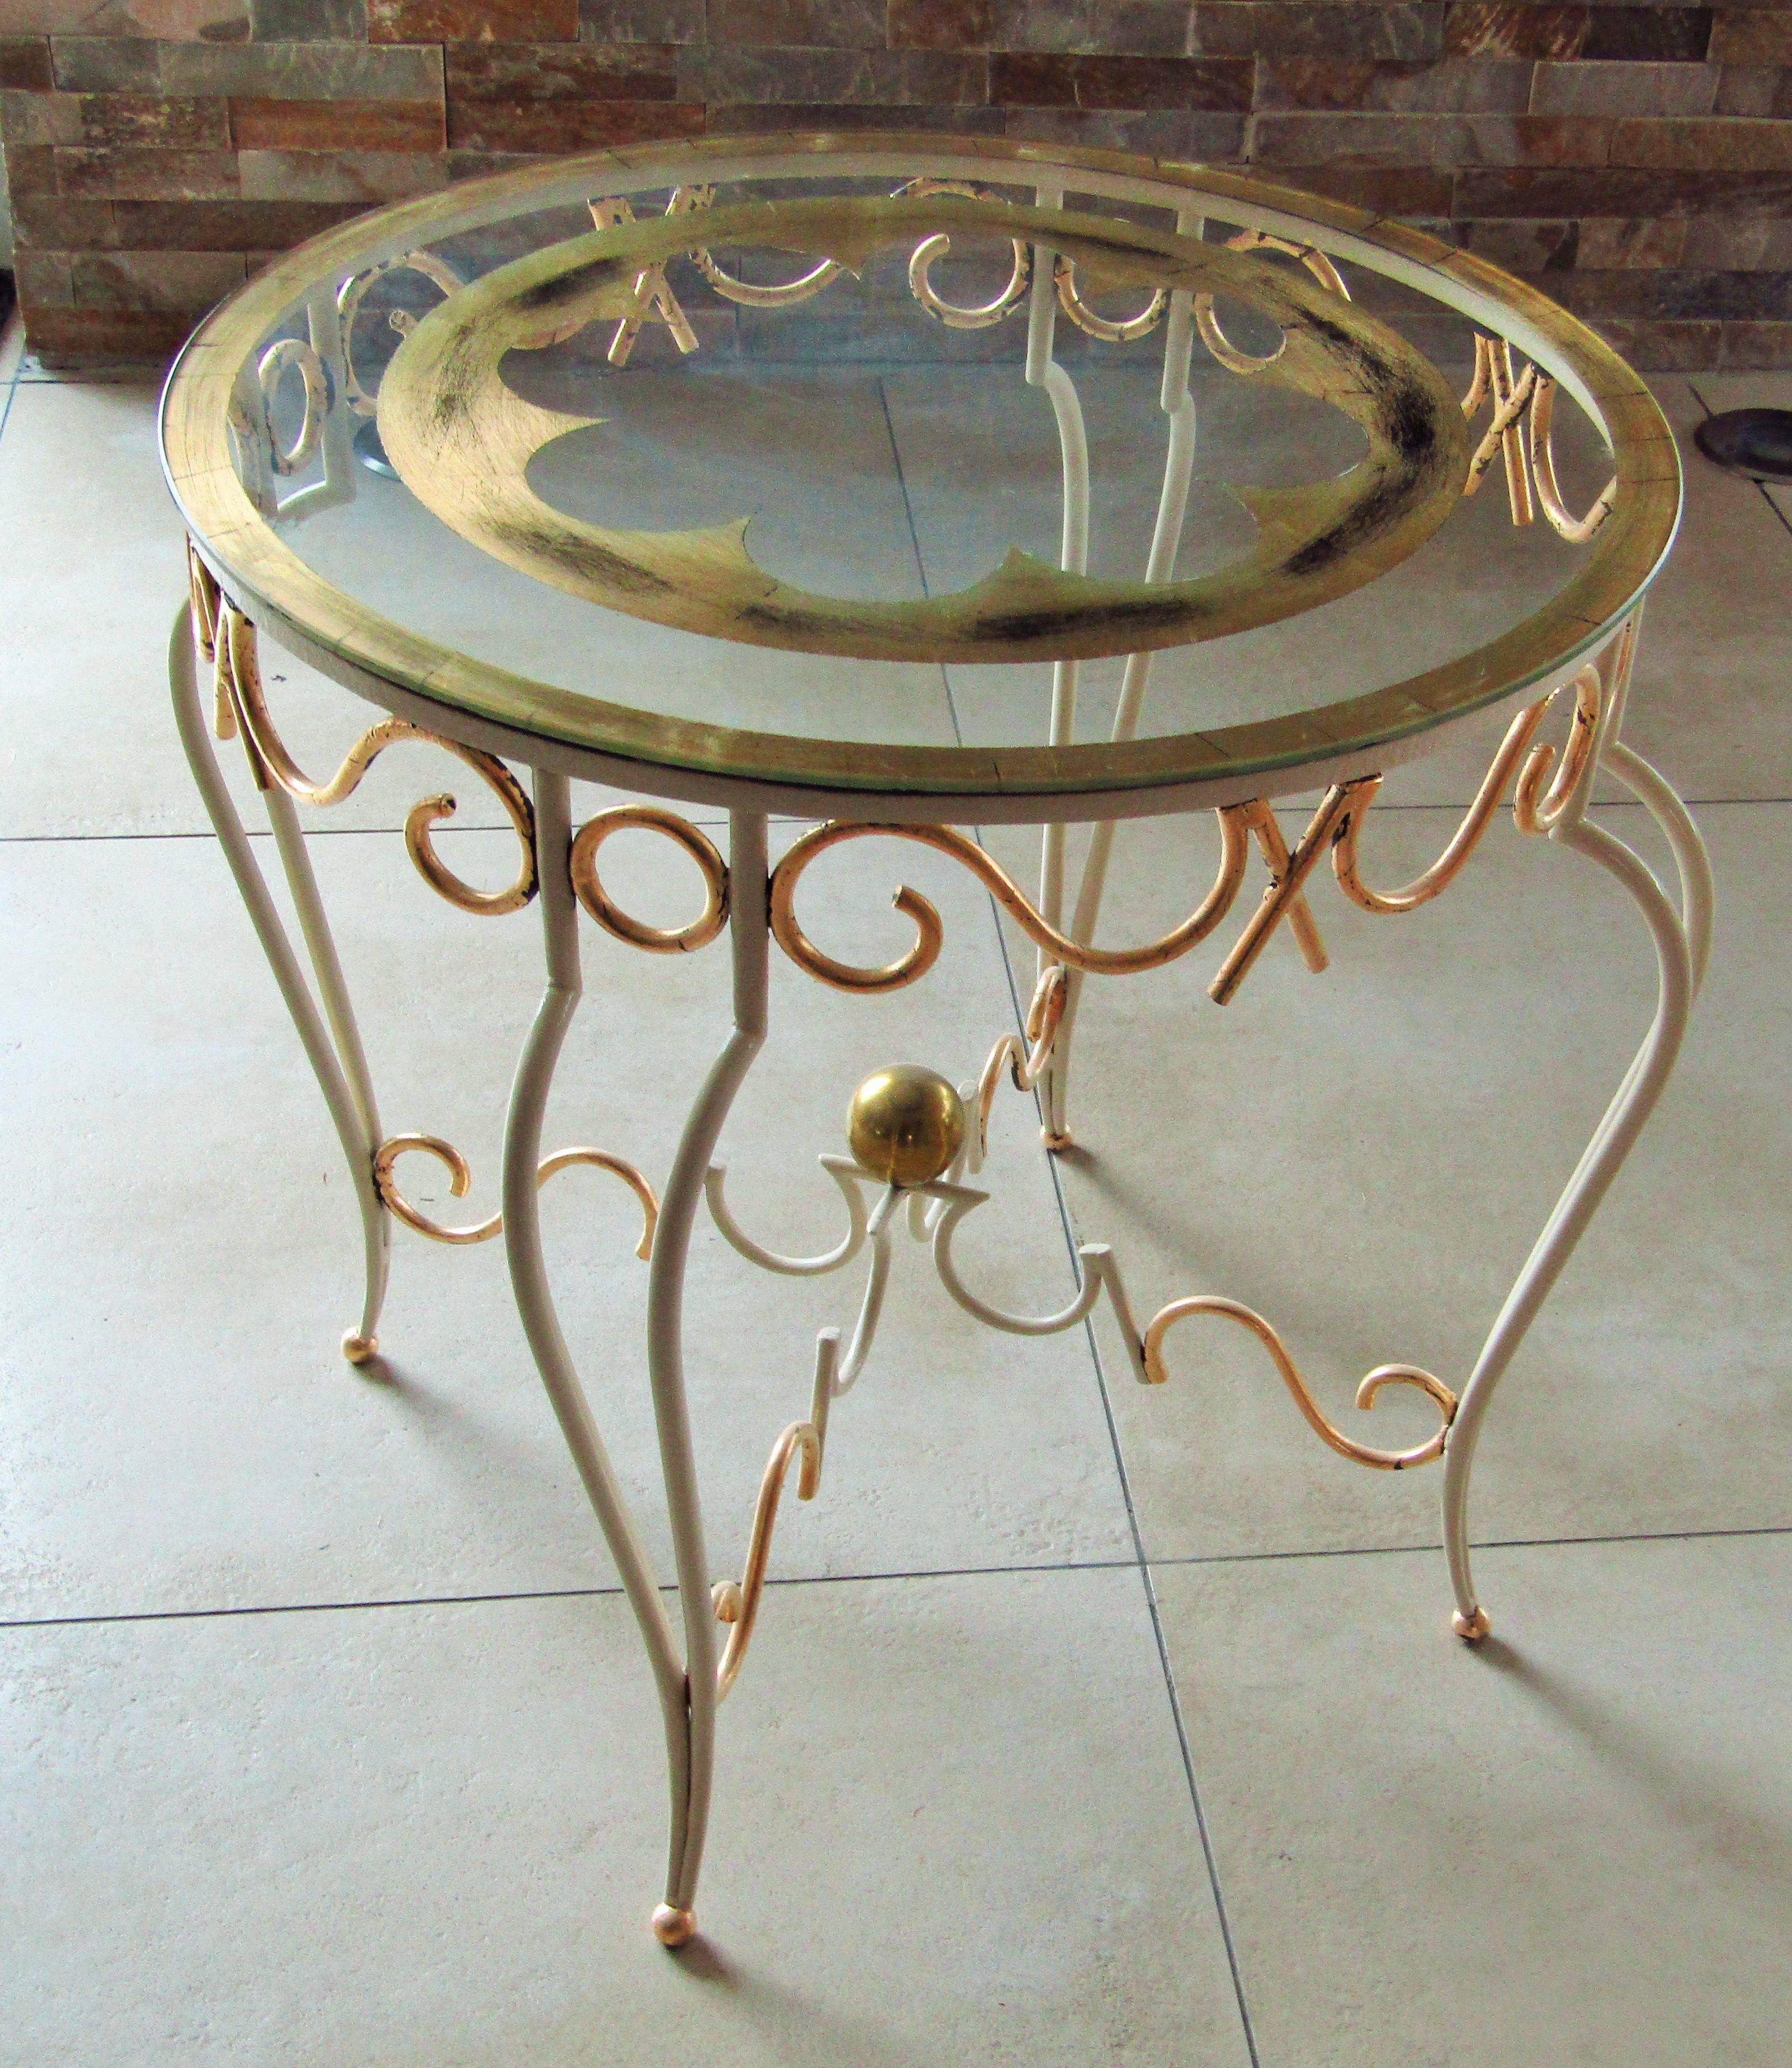 Art Deco coffee side table by Rene Prou, France 1935. Fully restored, wrought iron with ivory high gloss lacquer with gold leaf details. Glass tabletop with gold leaf details.

 